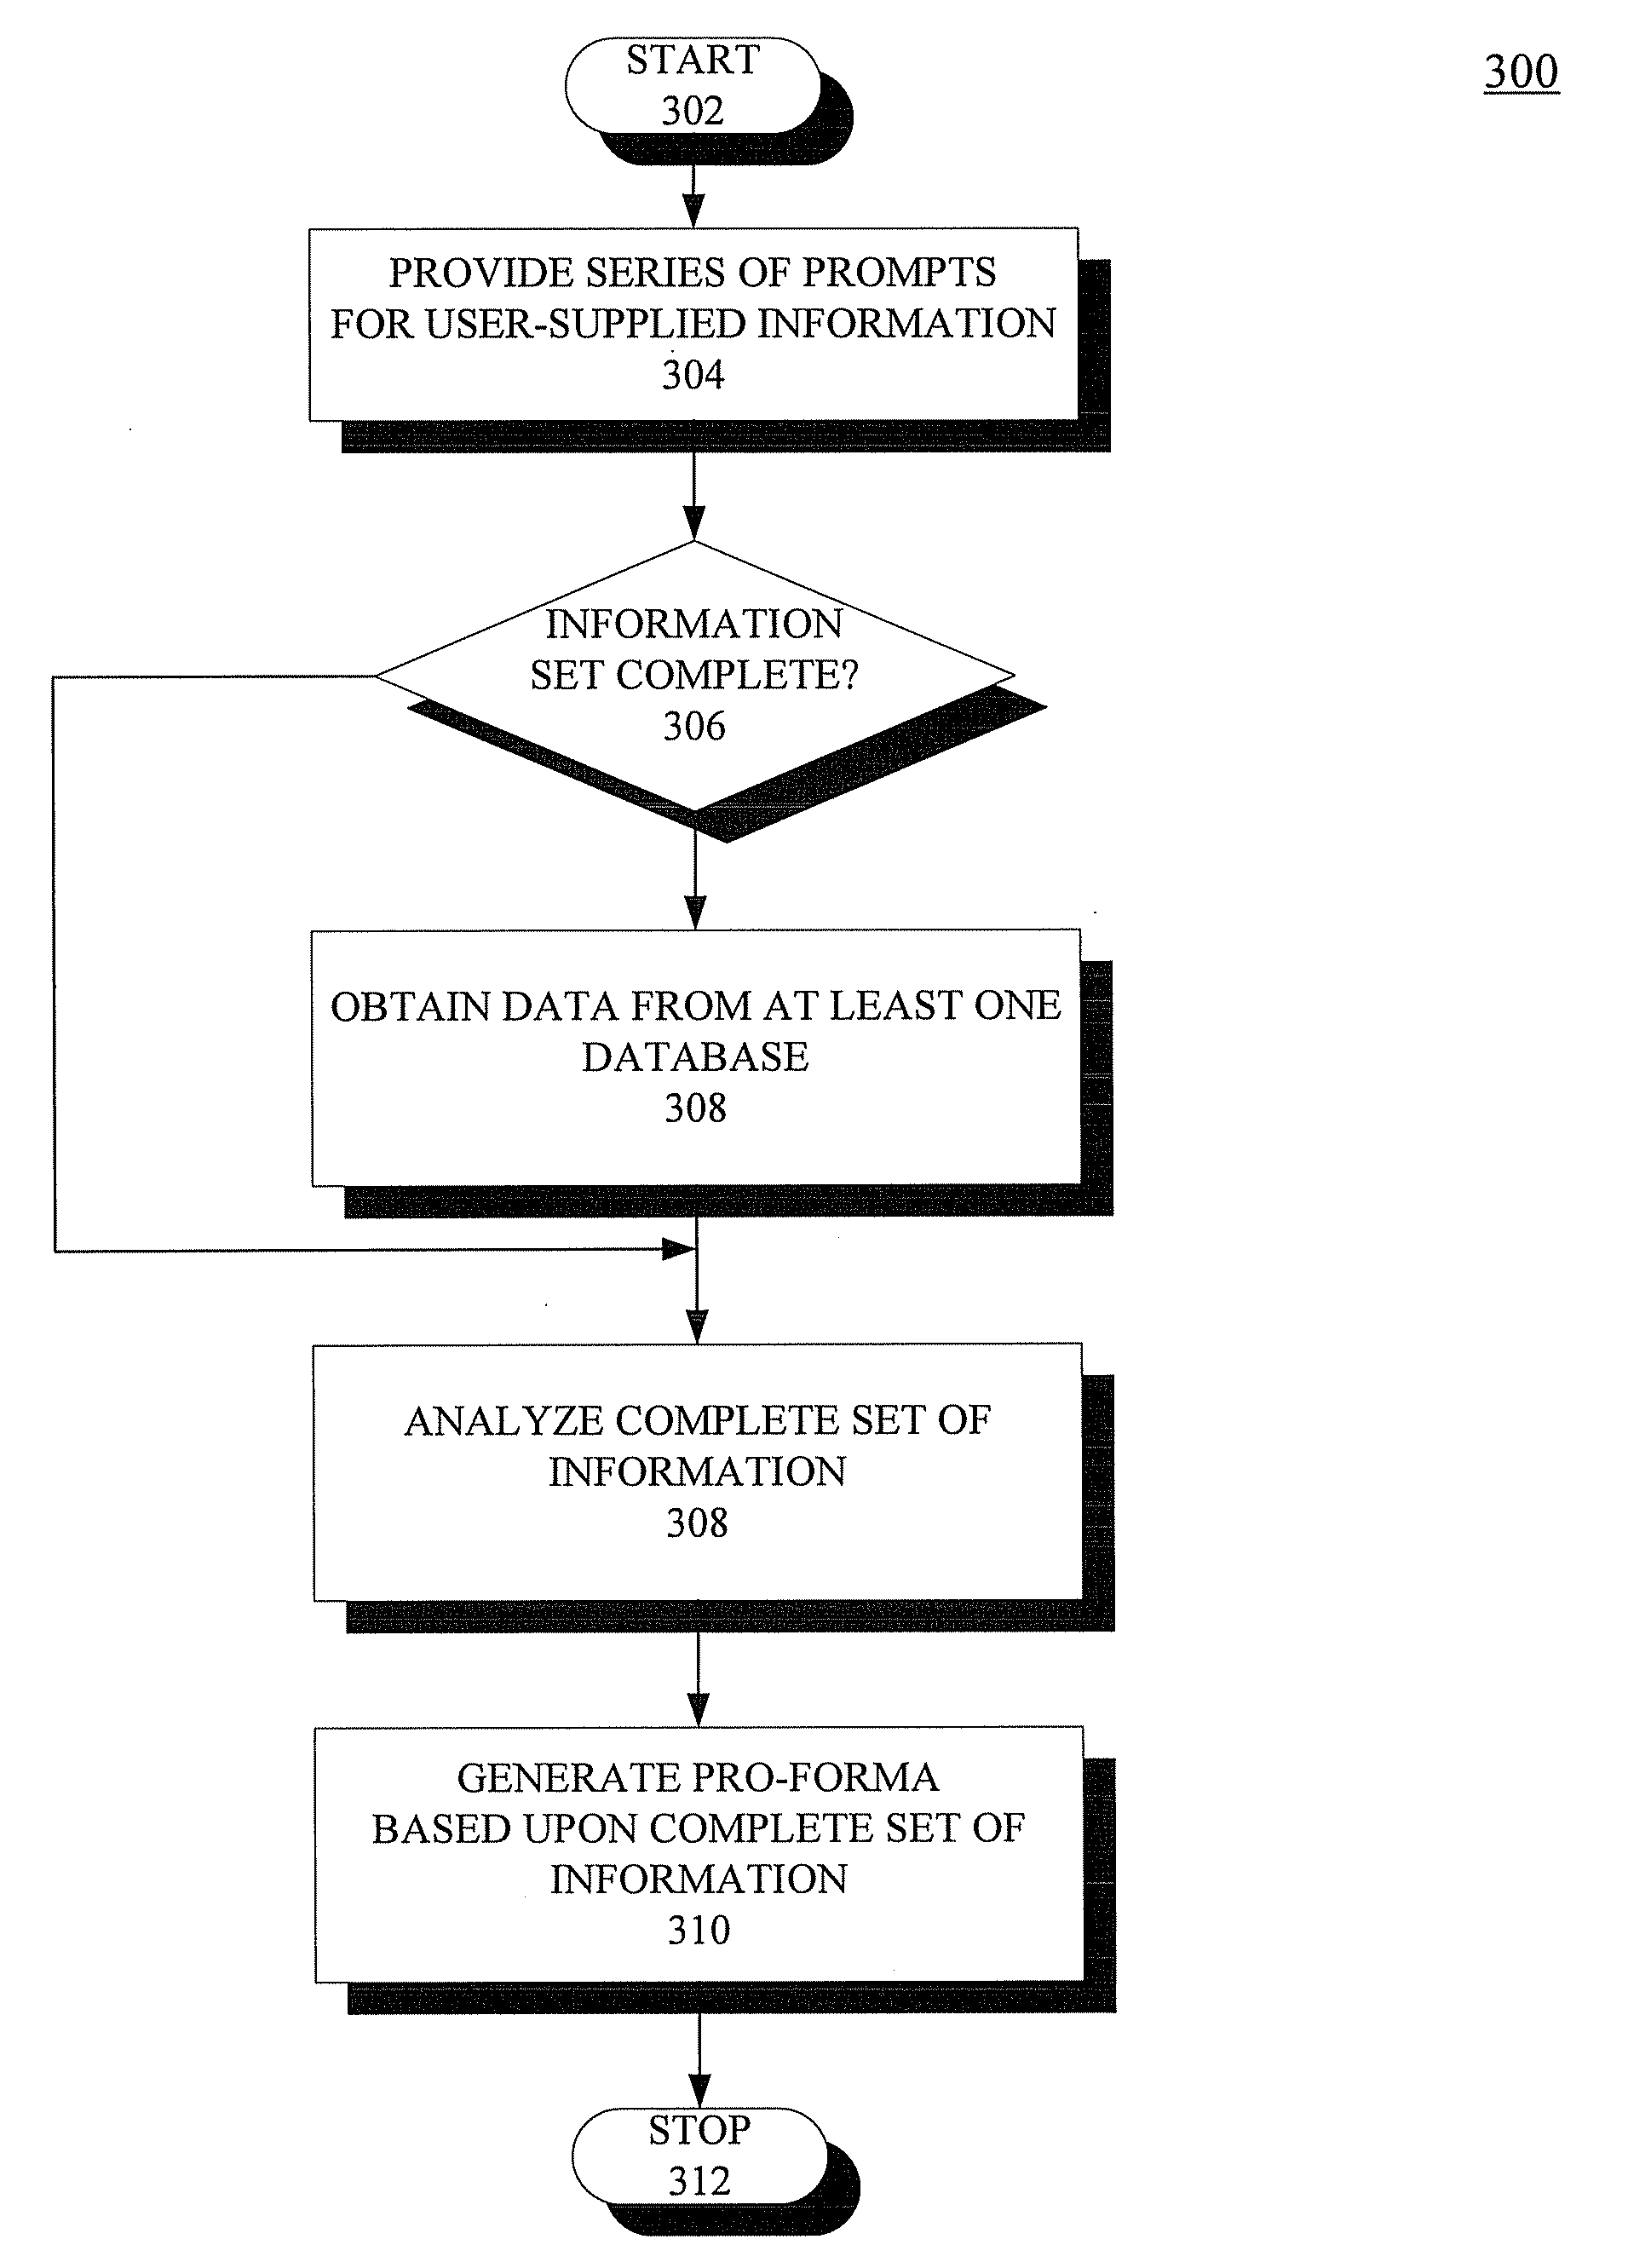 System and methods for generating pro-forma based upon input provided via a communications network